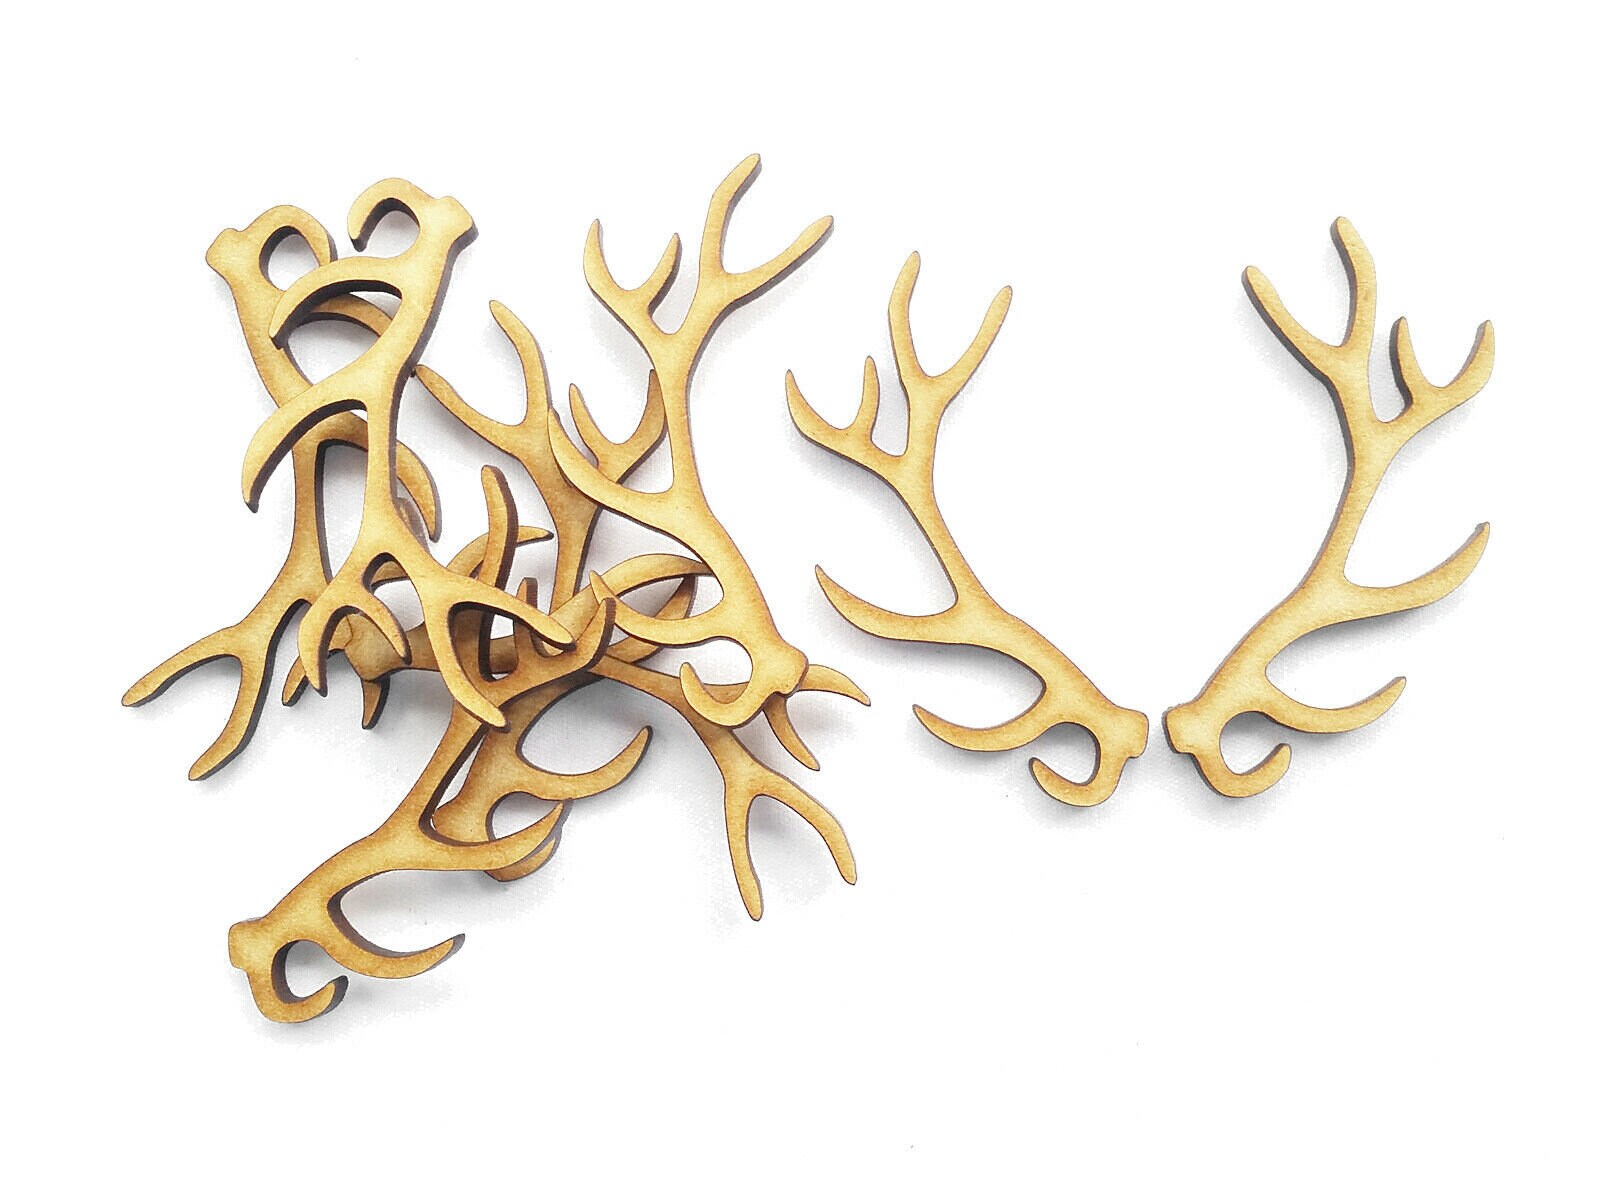 Antler Beads 10 Count - Antler For Crafts - Antler For Jewelry